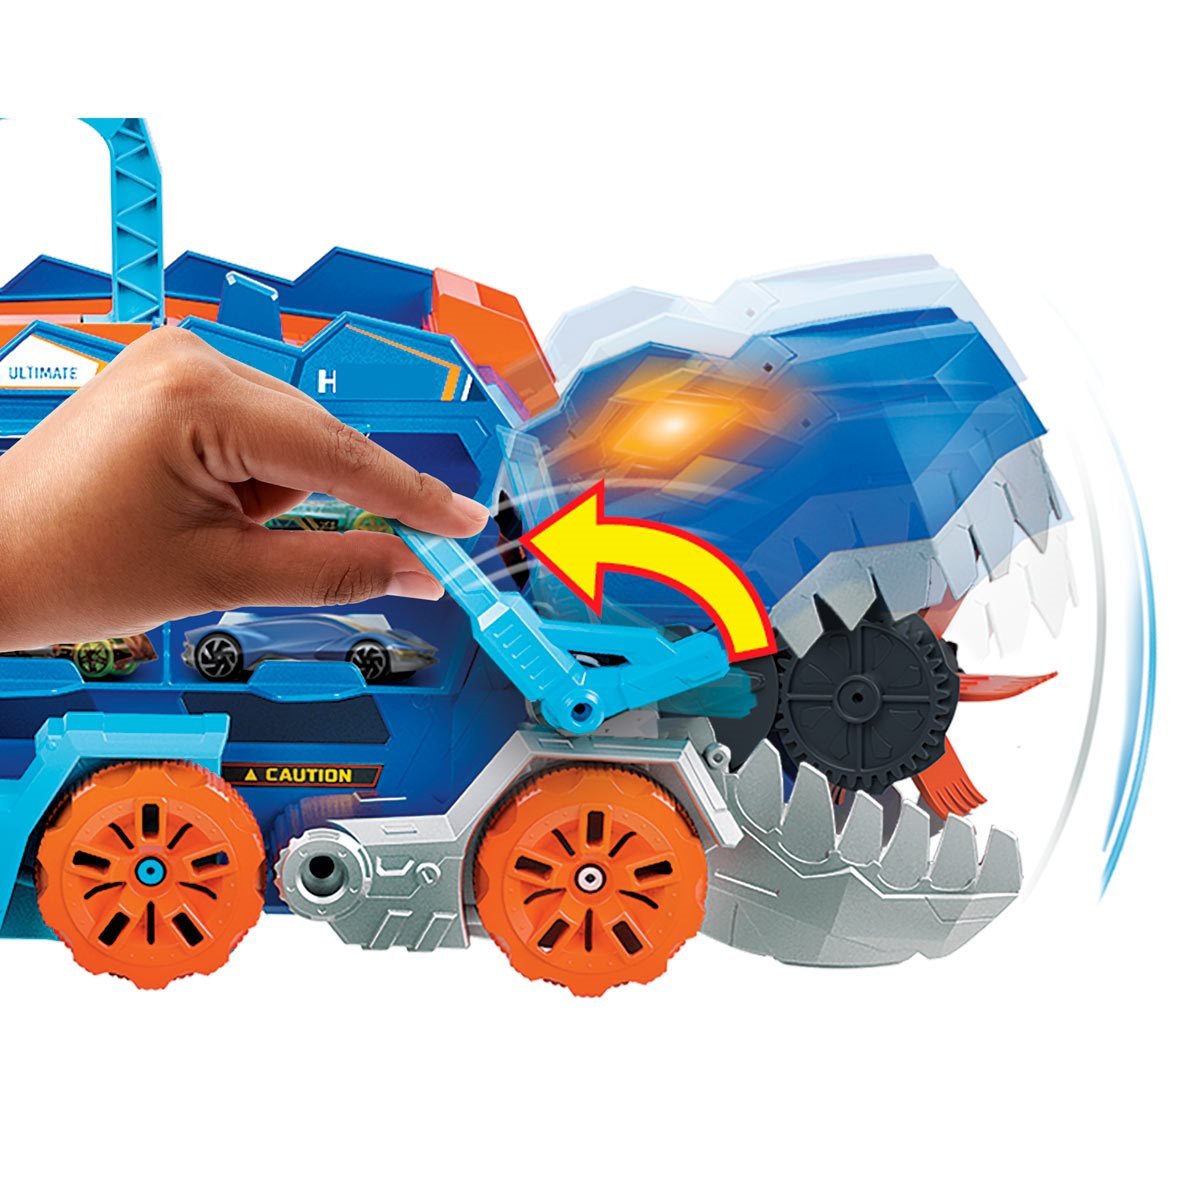 Hot Wheels Toy Car Track Set City Dragon Launch Transporter & 1:64 Scale  Car, Stores Up to 5 Vehicles